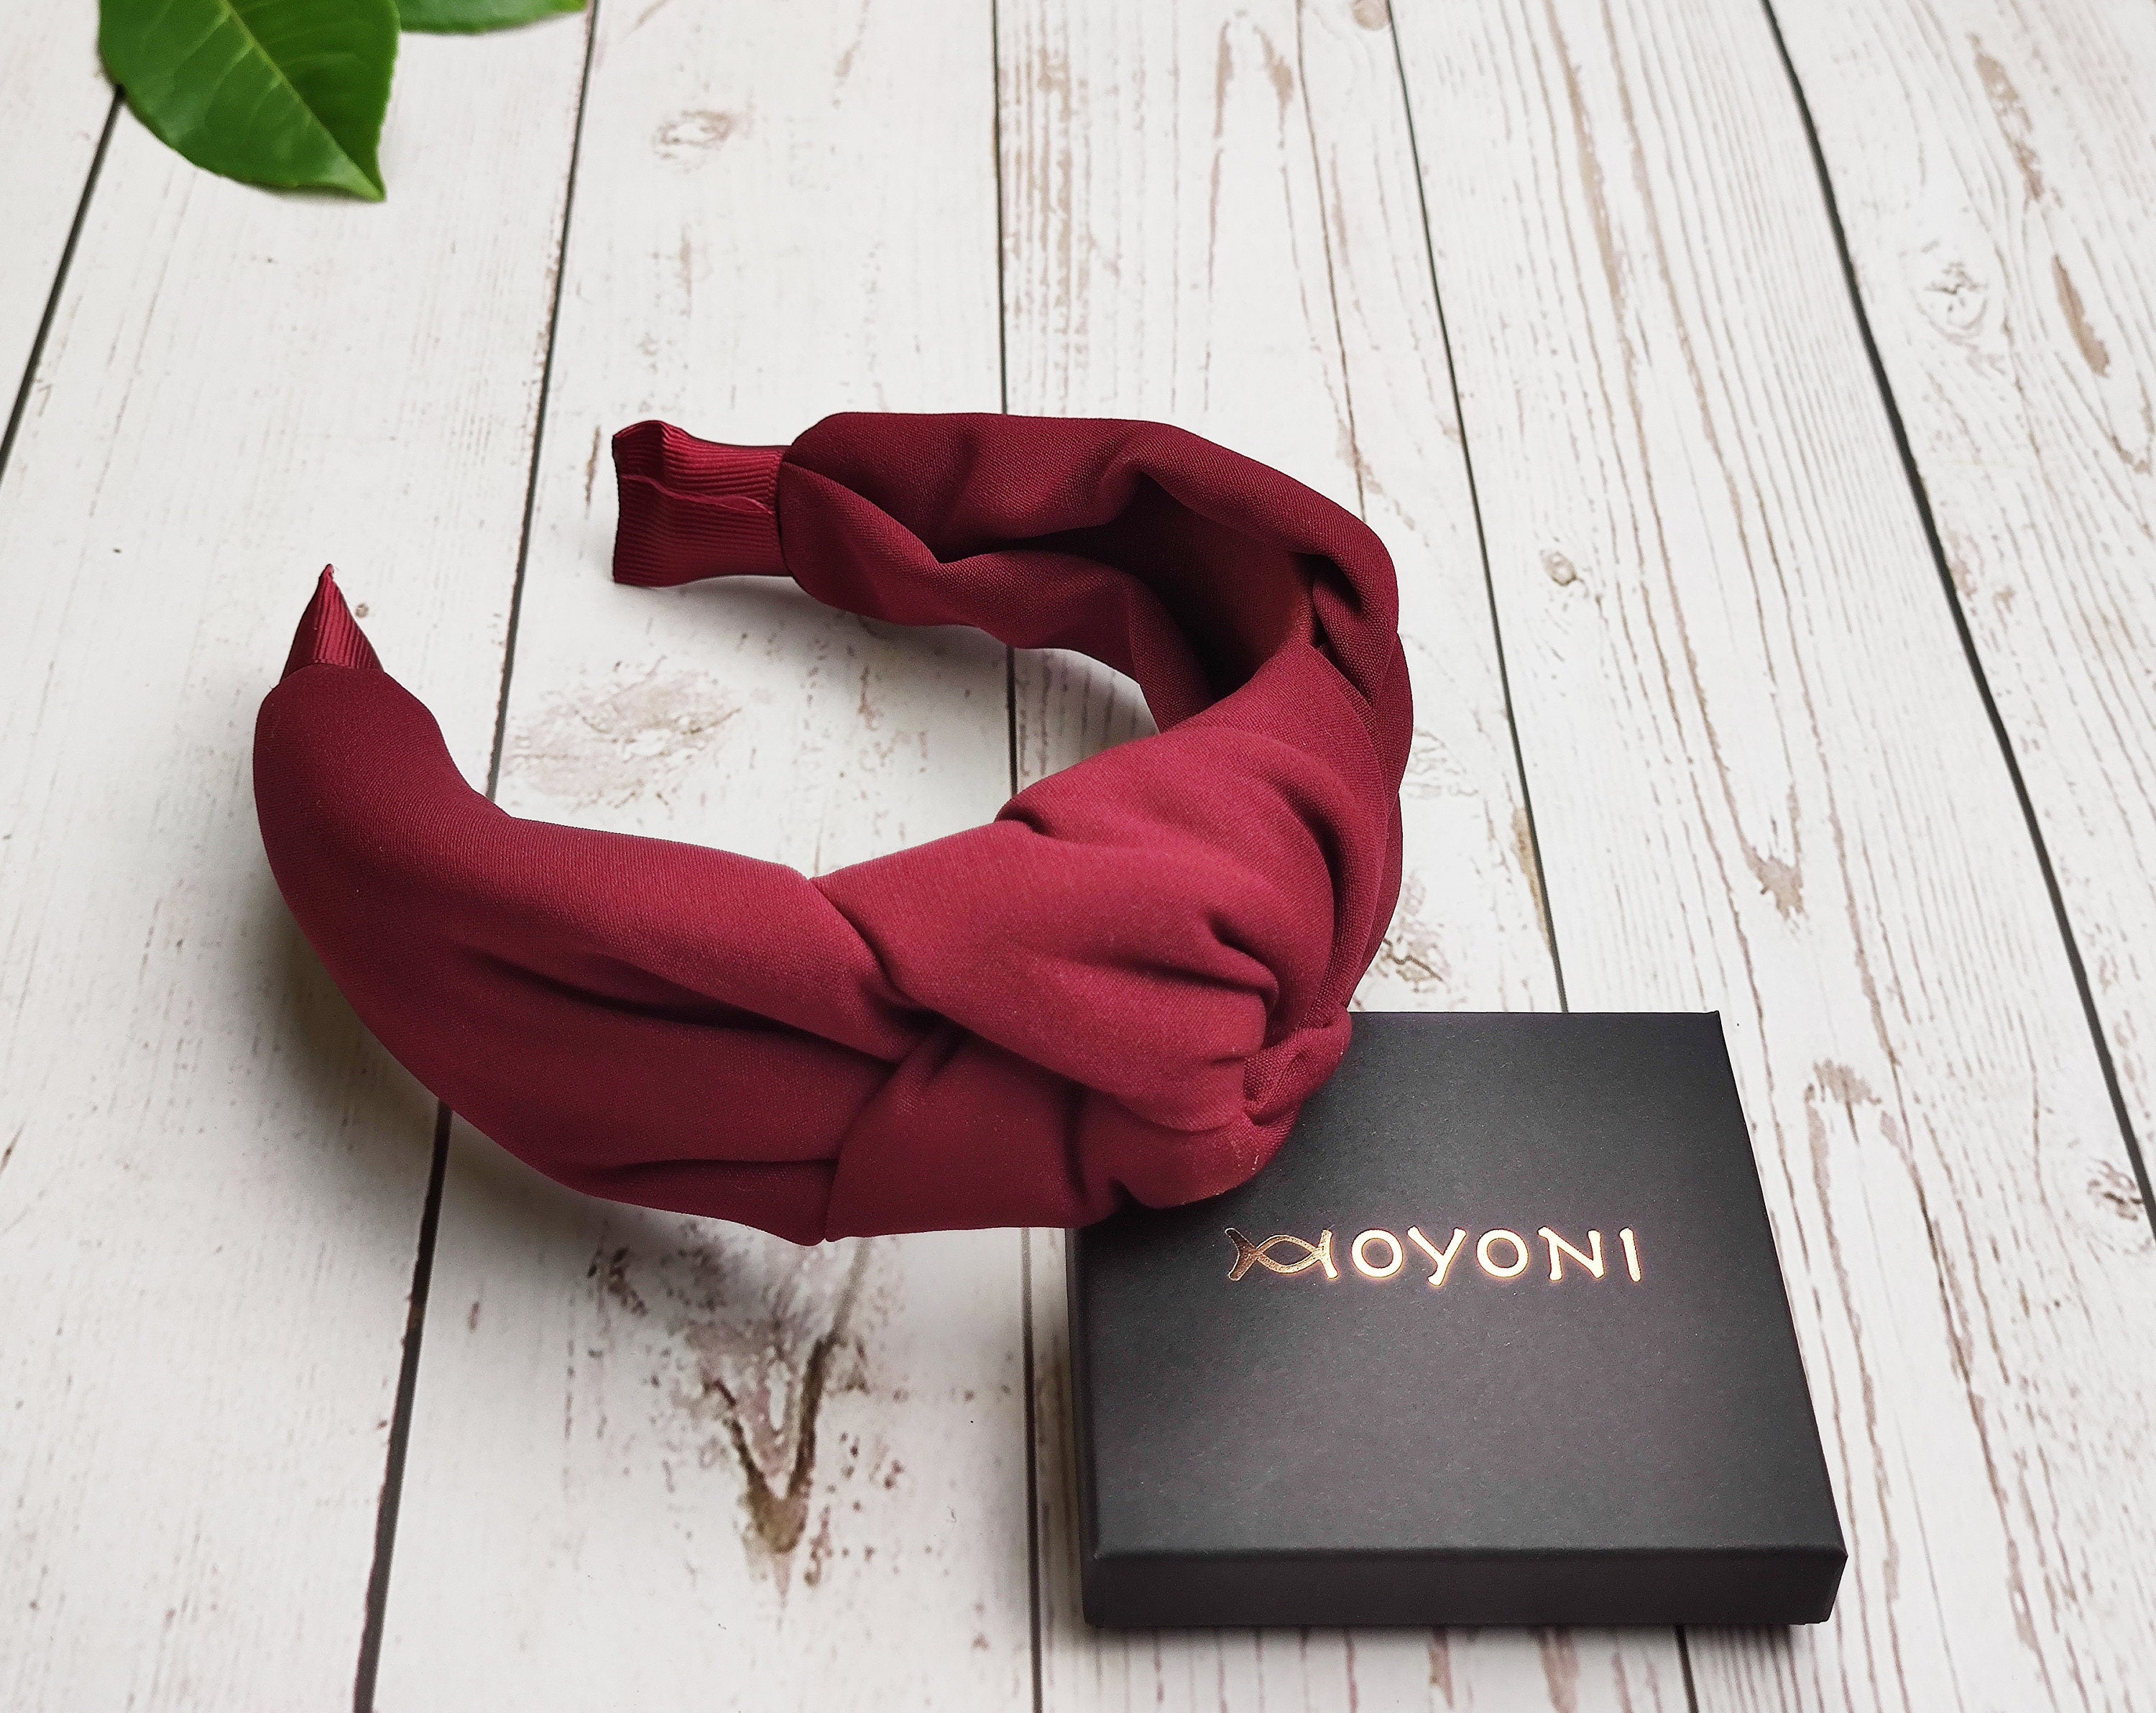 Have a fashionable and stylish day with these beautiful and trendy dark red twist knot headbands for women. Made from high-quality wine color viscose crepe, these headbands are sure to add a touch of class to your looks.